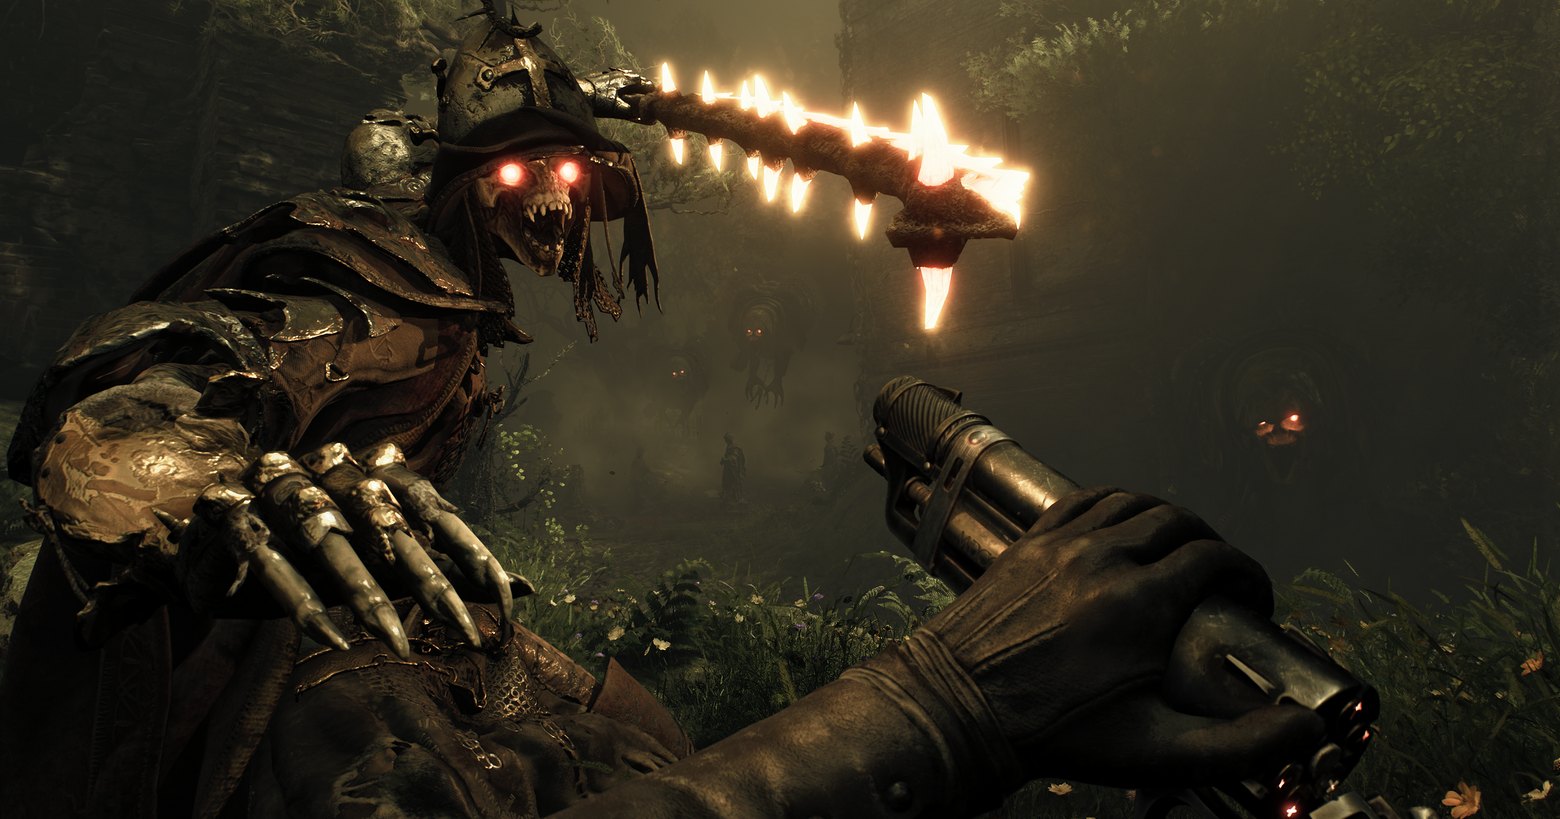 Here we see a screenshot from the new shooter Witchfire. We are the player in first-person perspective in a very dark interior courtyard, which is overgrown with numerous green plants. Just now we are reloading a futuristic-looking revolver, which we can see in the lower right corner of the image. On the left side, there is a skeletal witch-like creature with a brown robe, red glowing eyes, and a leathery hat. The creature is about to strike a blow with a burning club. In the background, we can see the outlines of tall stone buildings and in the center of the background, there are two flying demonic creatures with red glowing eyes. This shooter contains very fast-paced gameplay and is a roguelite title.